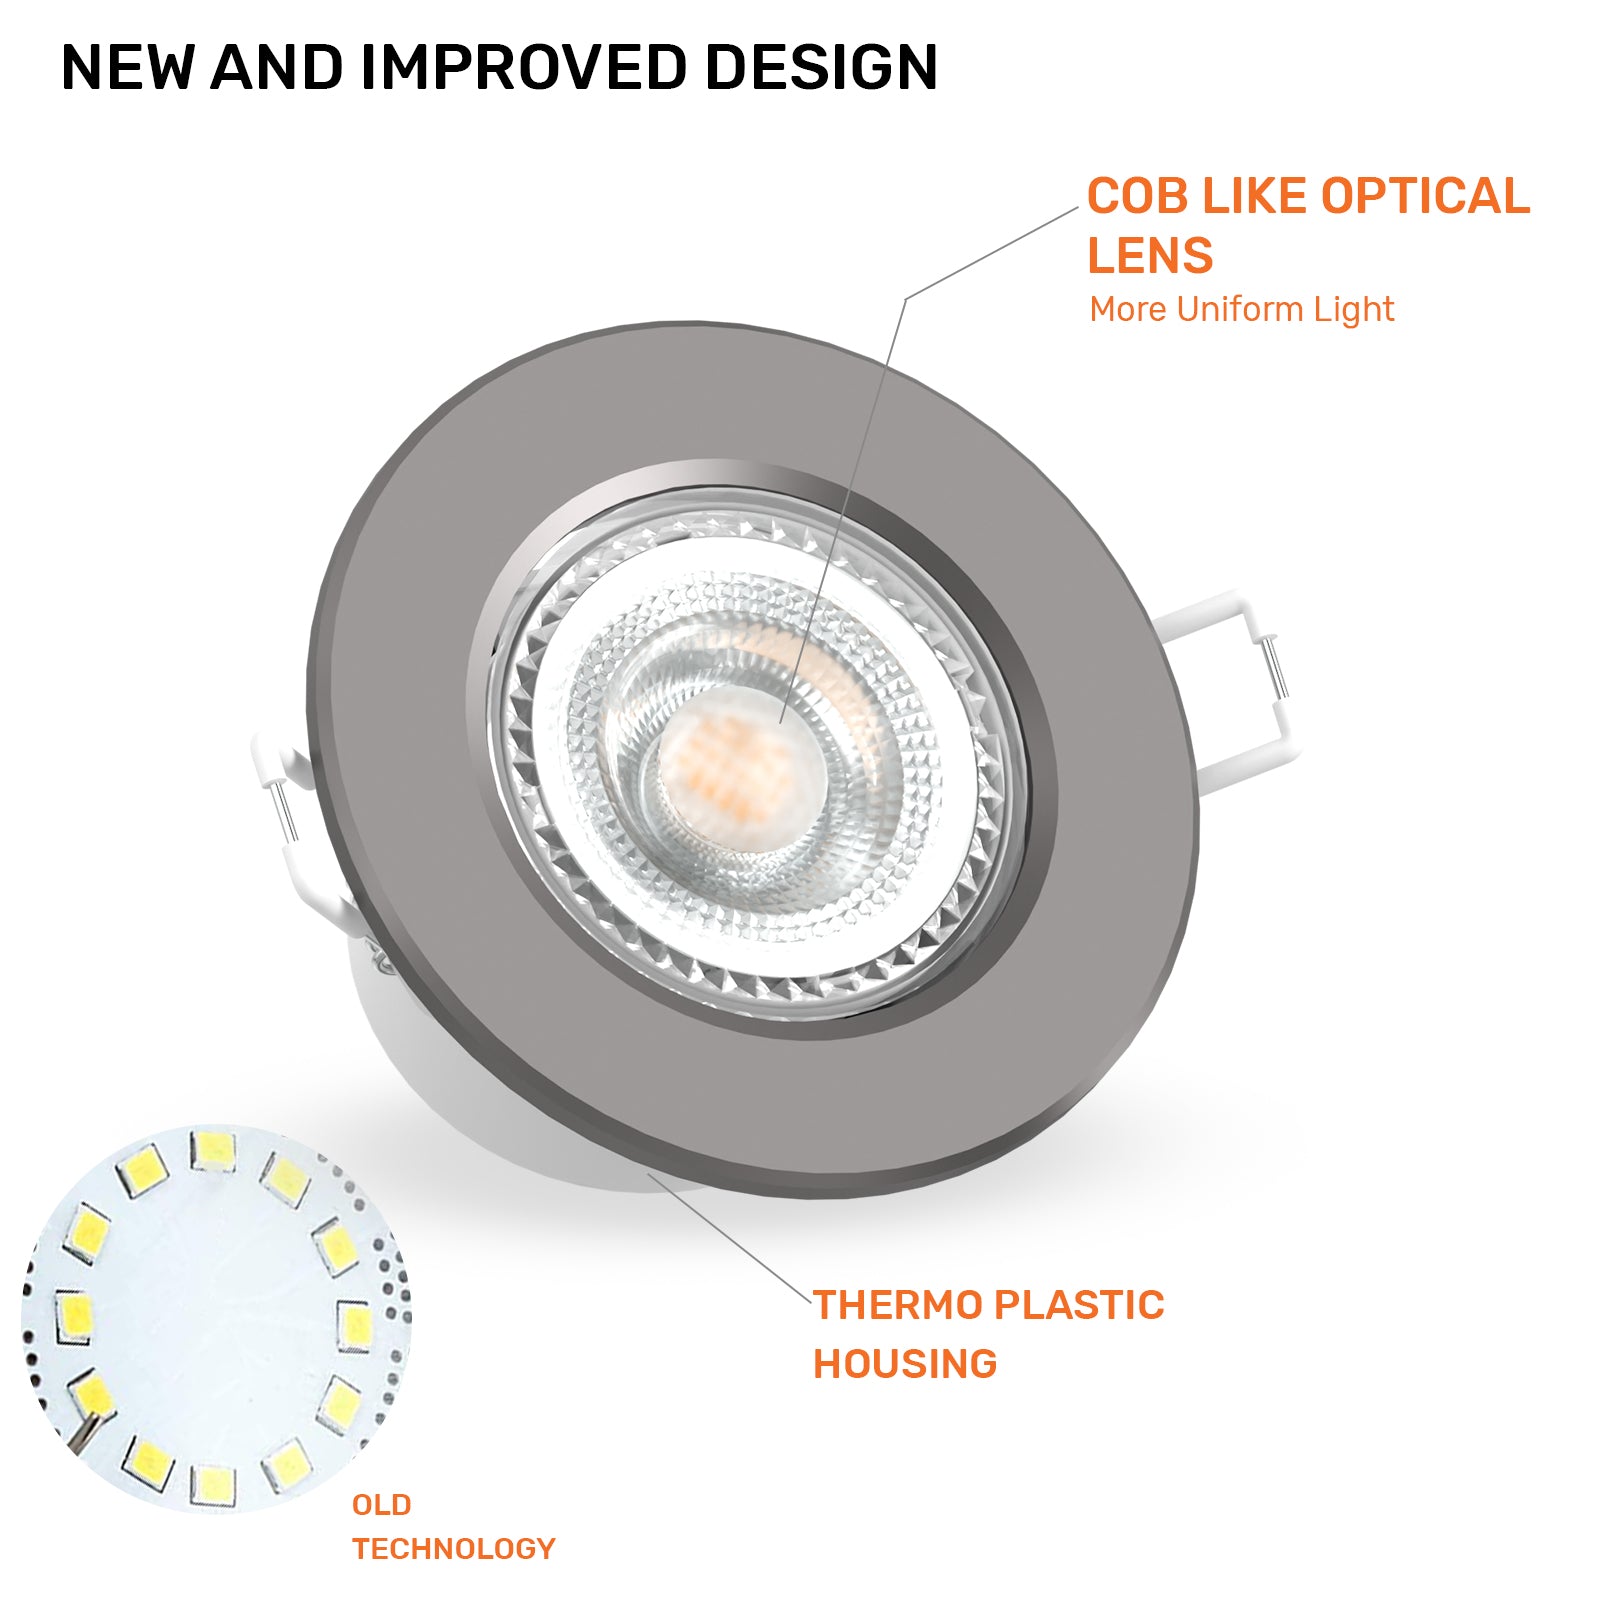 Paul Russells 6W LED Non Fire Rated Tiltable Downlight, Warm/Cool/Day White 3 Adjustable CCT, IP44, Chrome Bezel